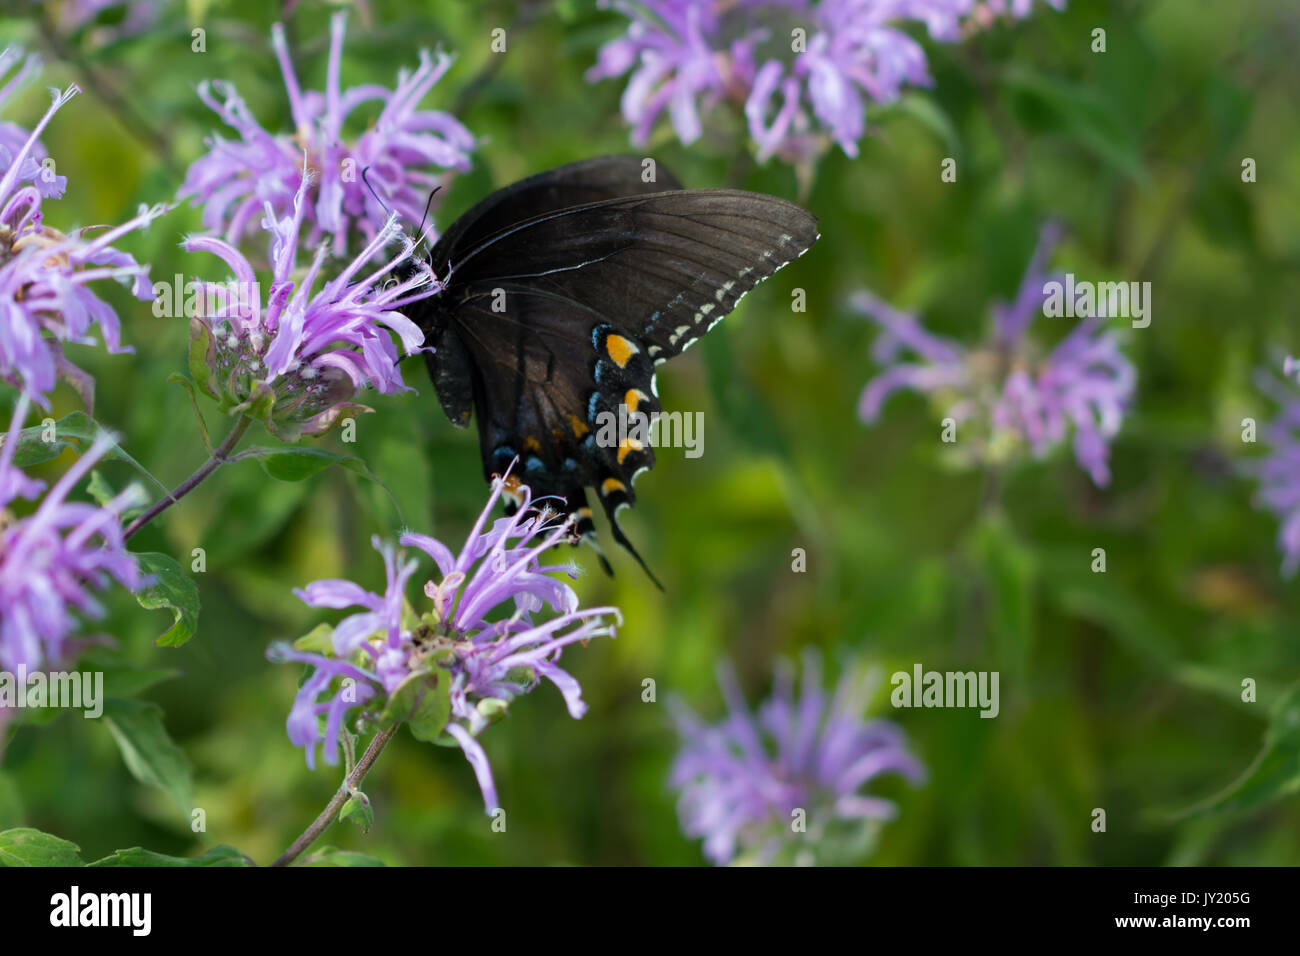 A black swallowtail butterfly taking nectar from a  Wild Bergamont flower. Stock Photo